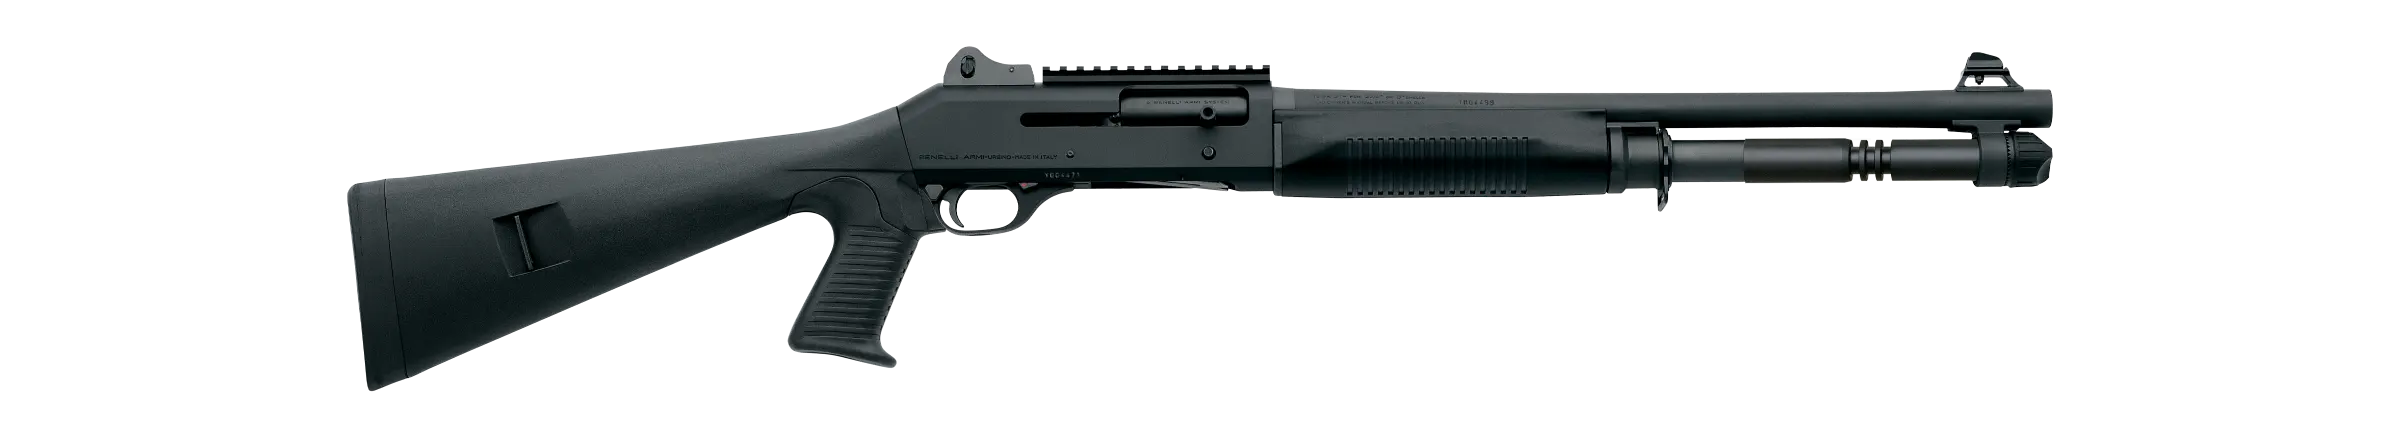 benelli-m4-tactical